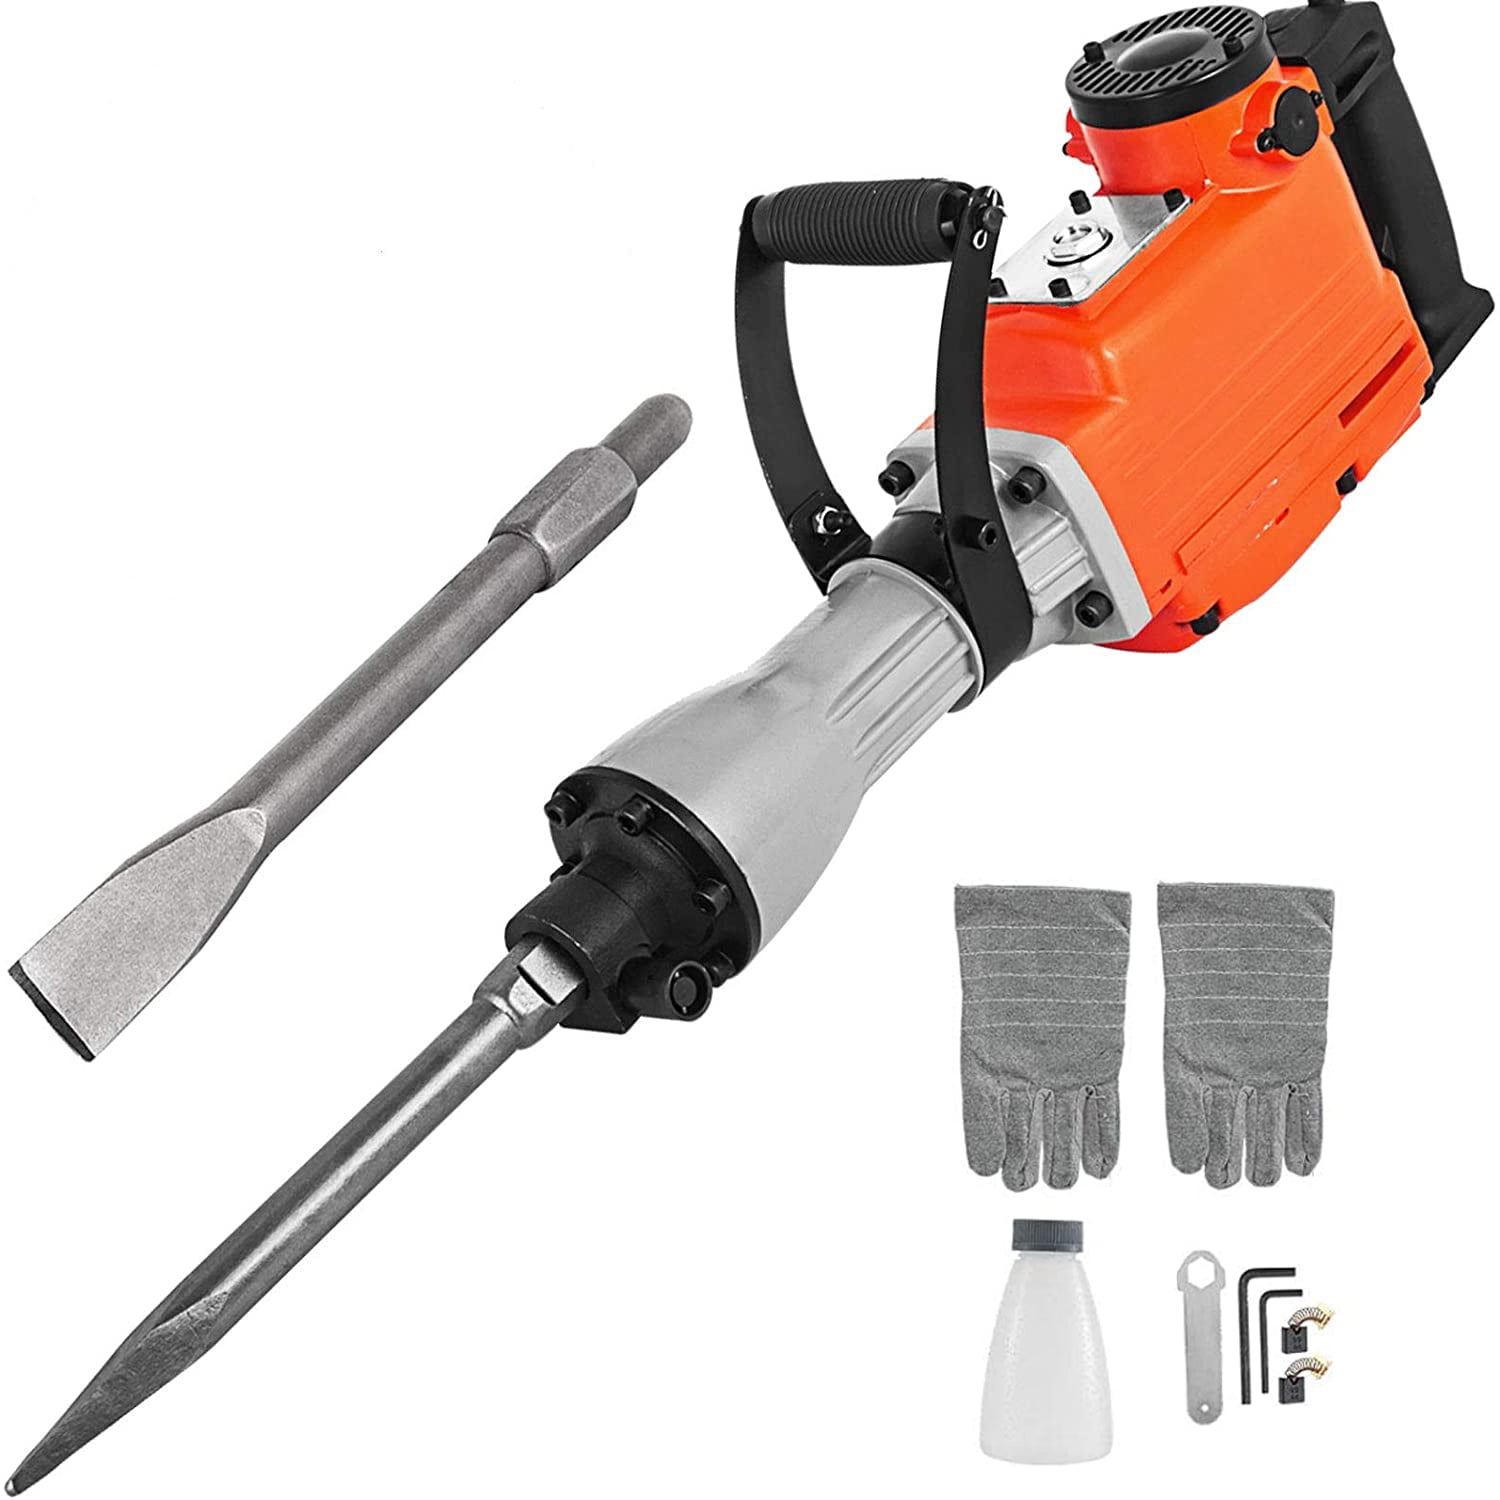 2200W Demolition Electric Jack Hammer Concrete Breaker Power Hammer, Heavy  Duty Concrete Breaker Demolition Drills with Flat Chisel, Bull Point